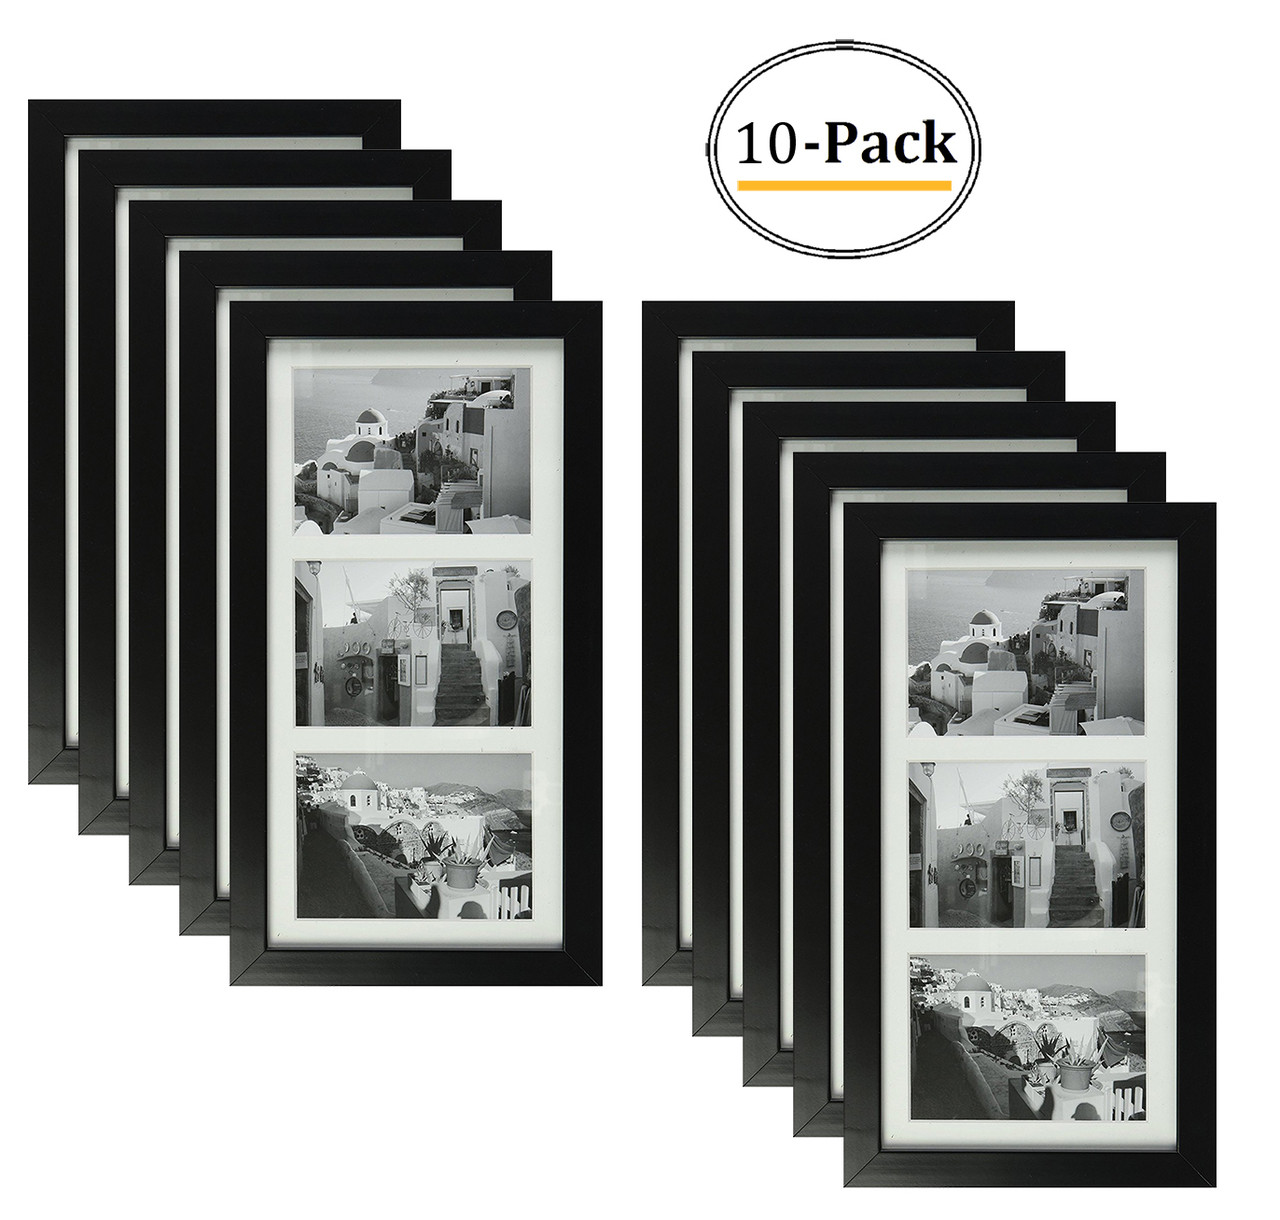 4"x6" pictures 7x14 Black Photo Wood Collage Frame with Mat displays 3 